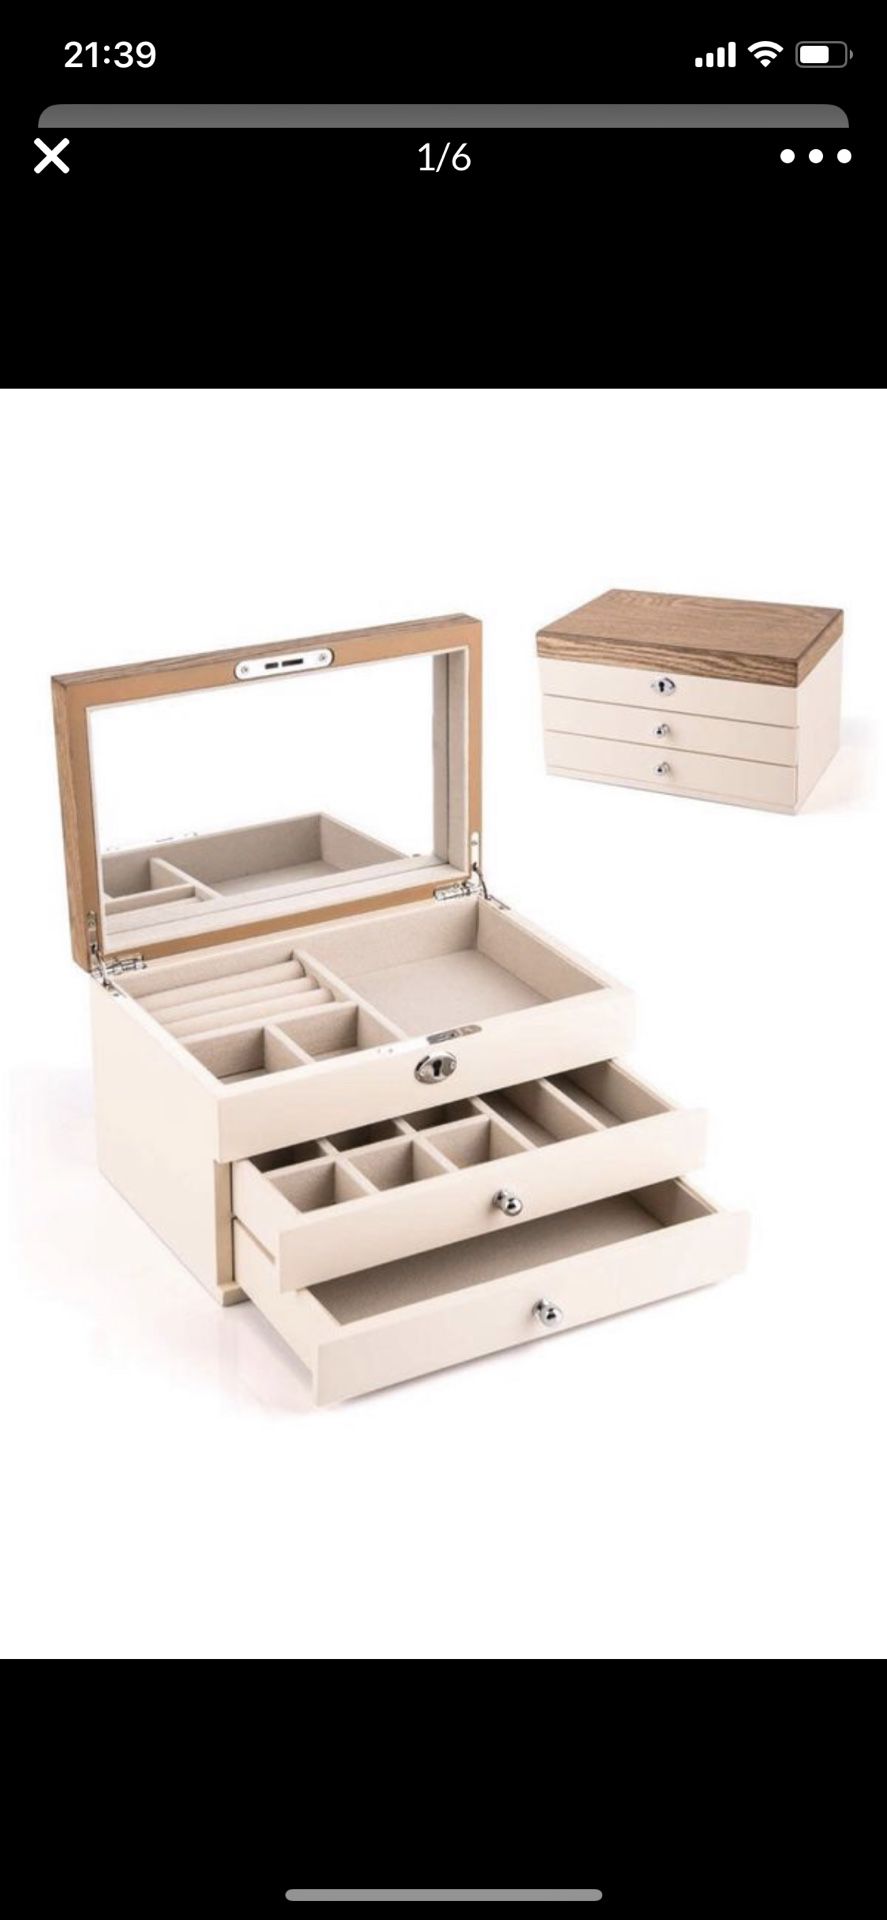 Brand new Wooden Jewelry Organizer Box,Lockable Mirrored Jewelry Storage Case for Necklaces Bracelets Earrings Rings Watches - Beige